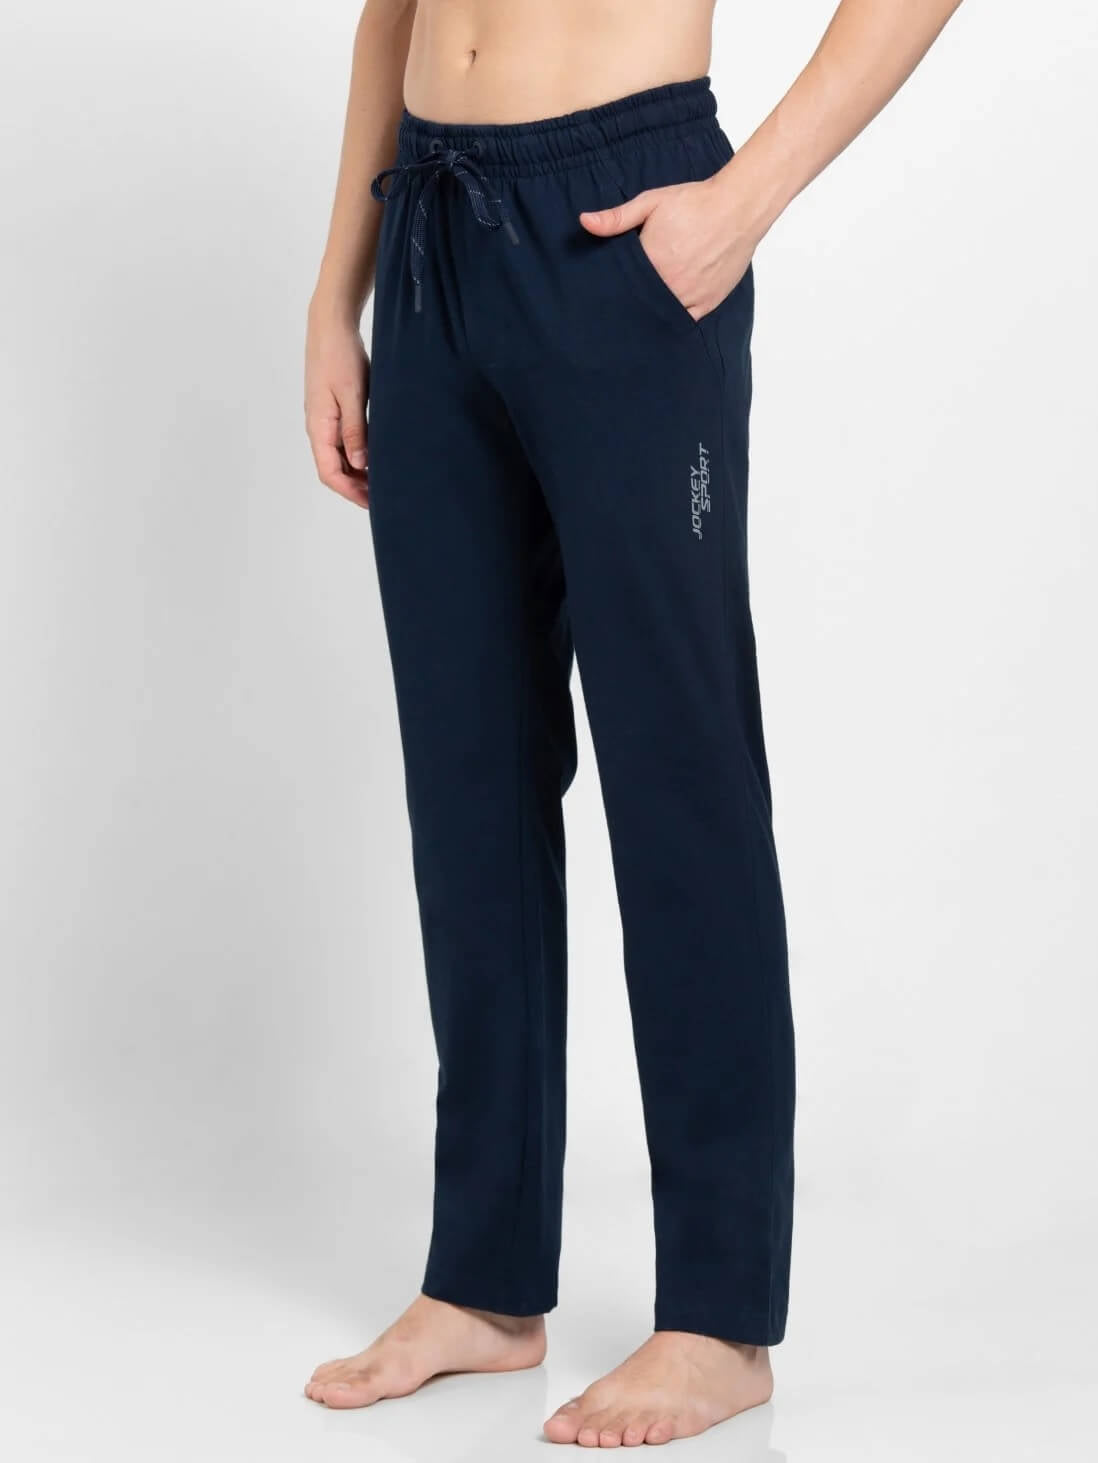 Buy Jockey AM42 Slim Fit Track Pant With Drawstring Closure And Zipper  Pocket Performance Grey S Online at Low Prices in India at Bigdeals24x7.com